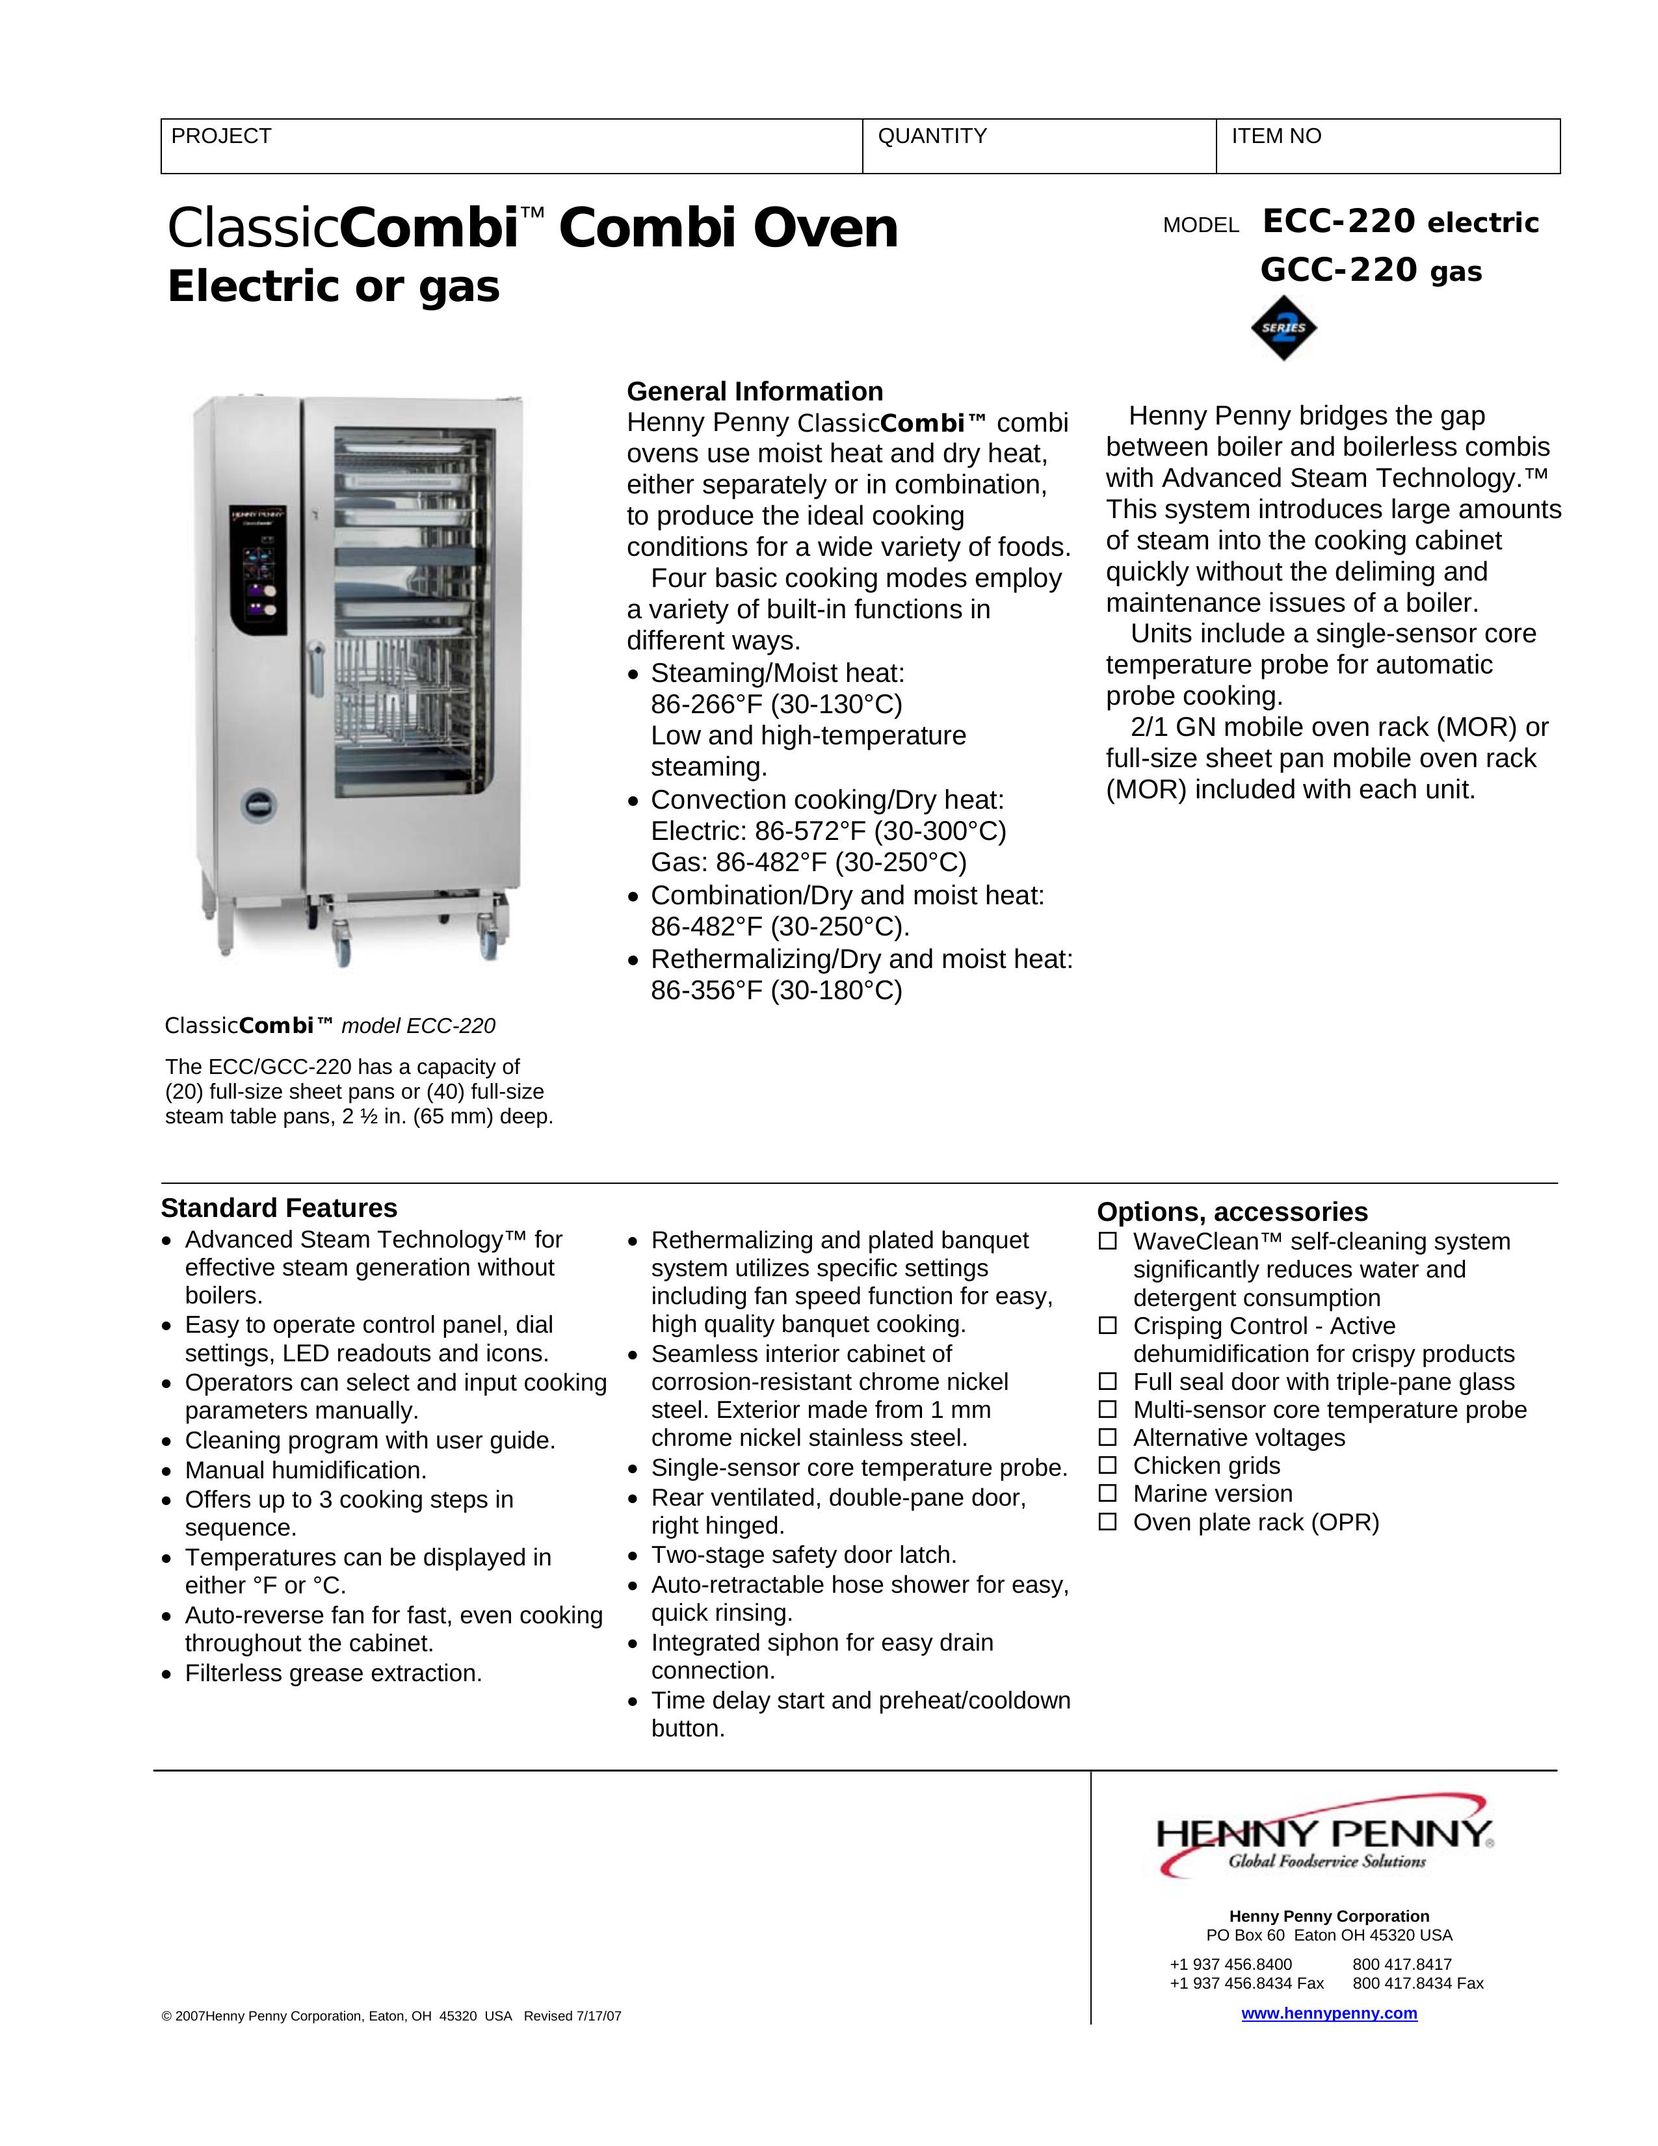 Henny Penny GCC-220 gas Oven User Manual